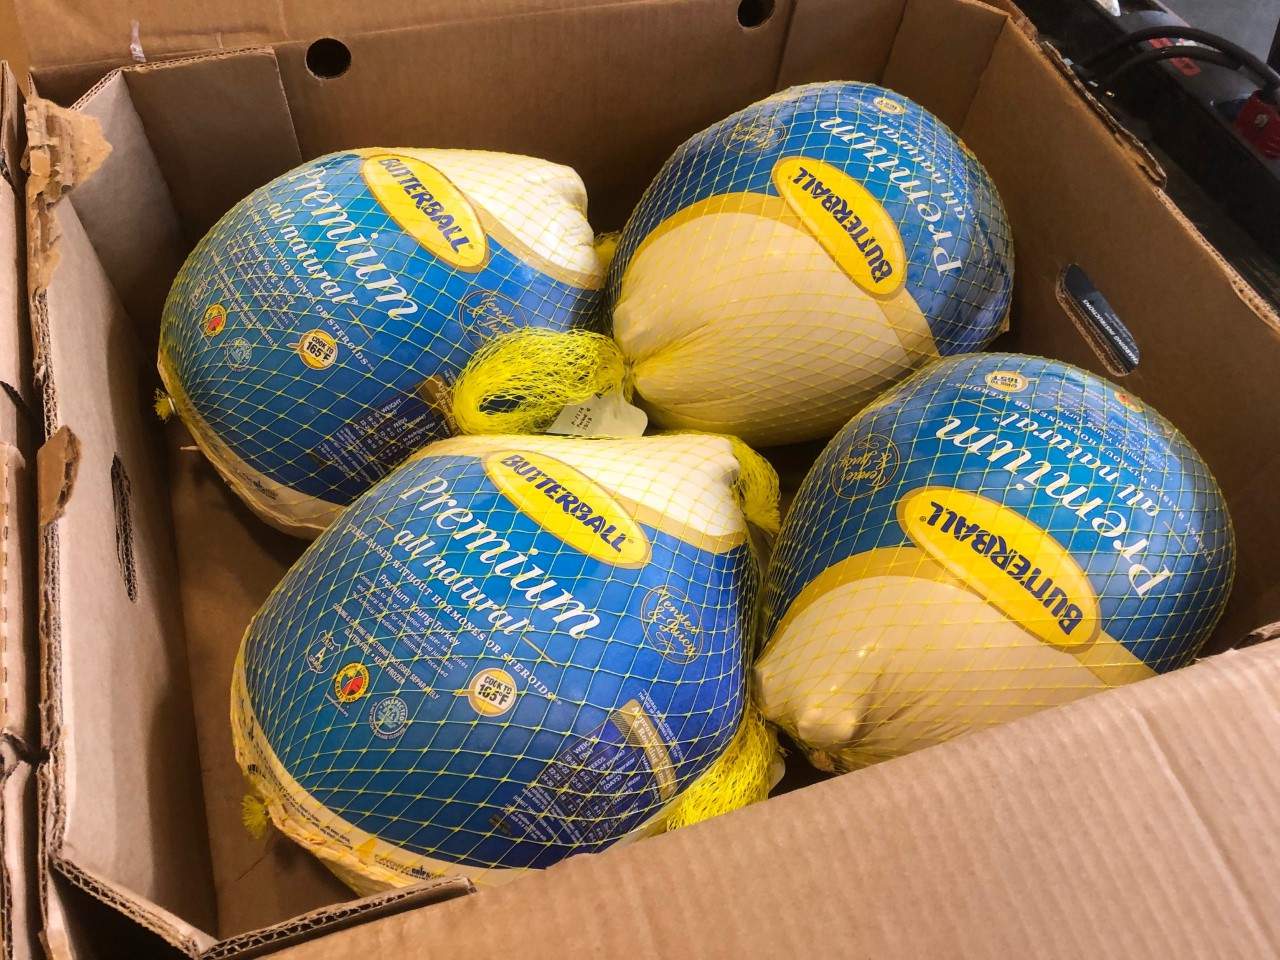 Second Harvest Food Bank gives away 1,000 turkeys ahead of Thanksgiving